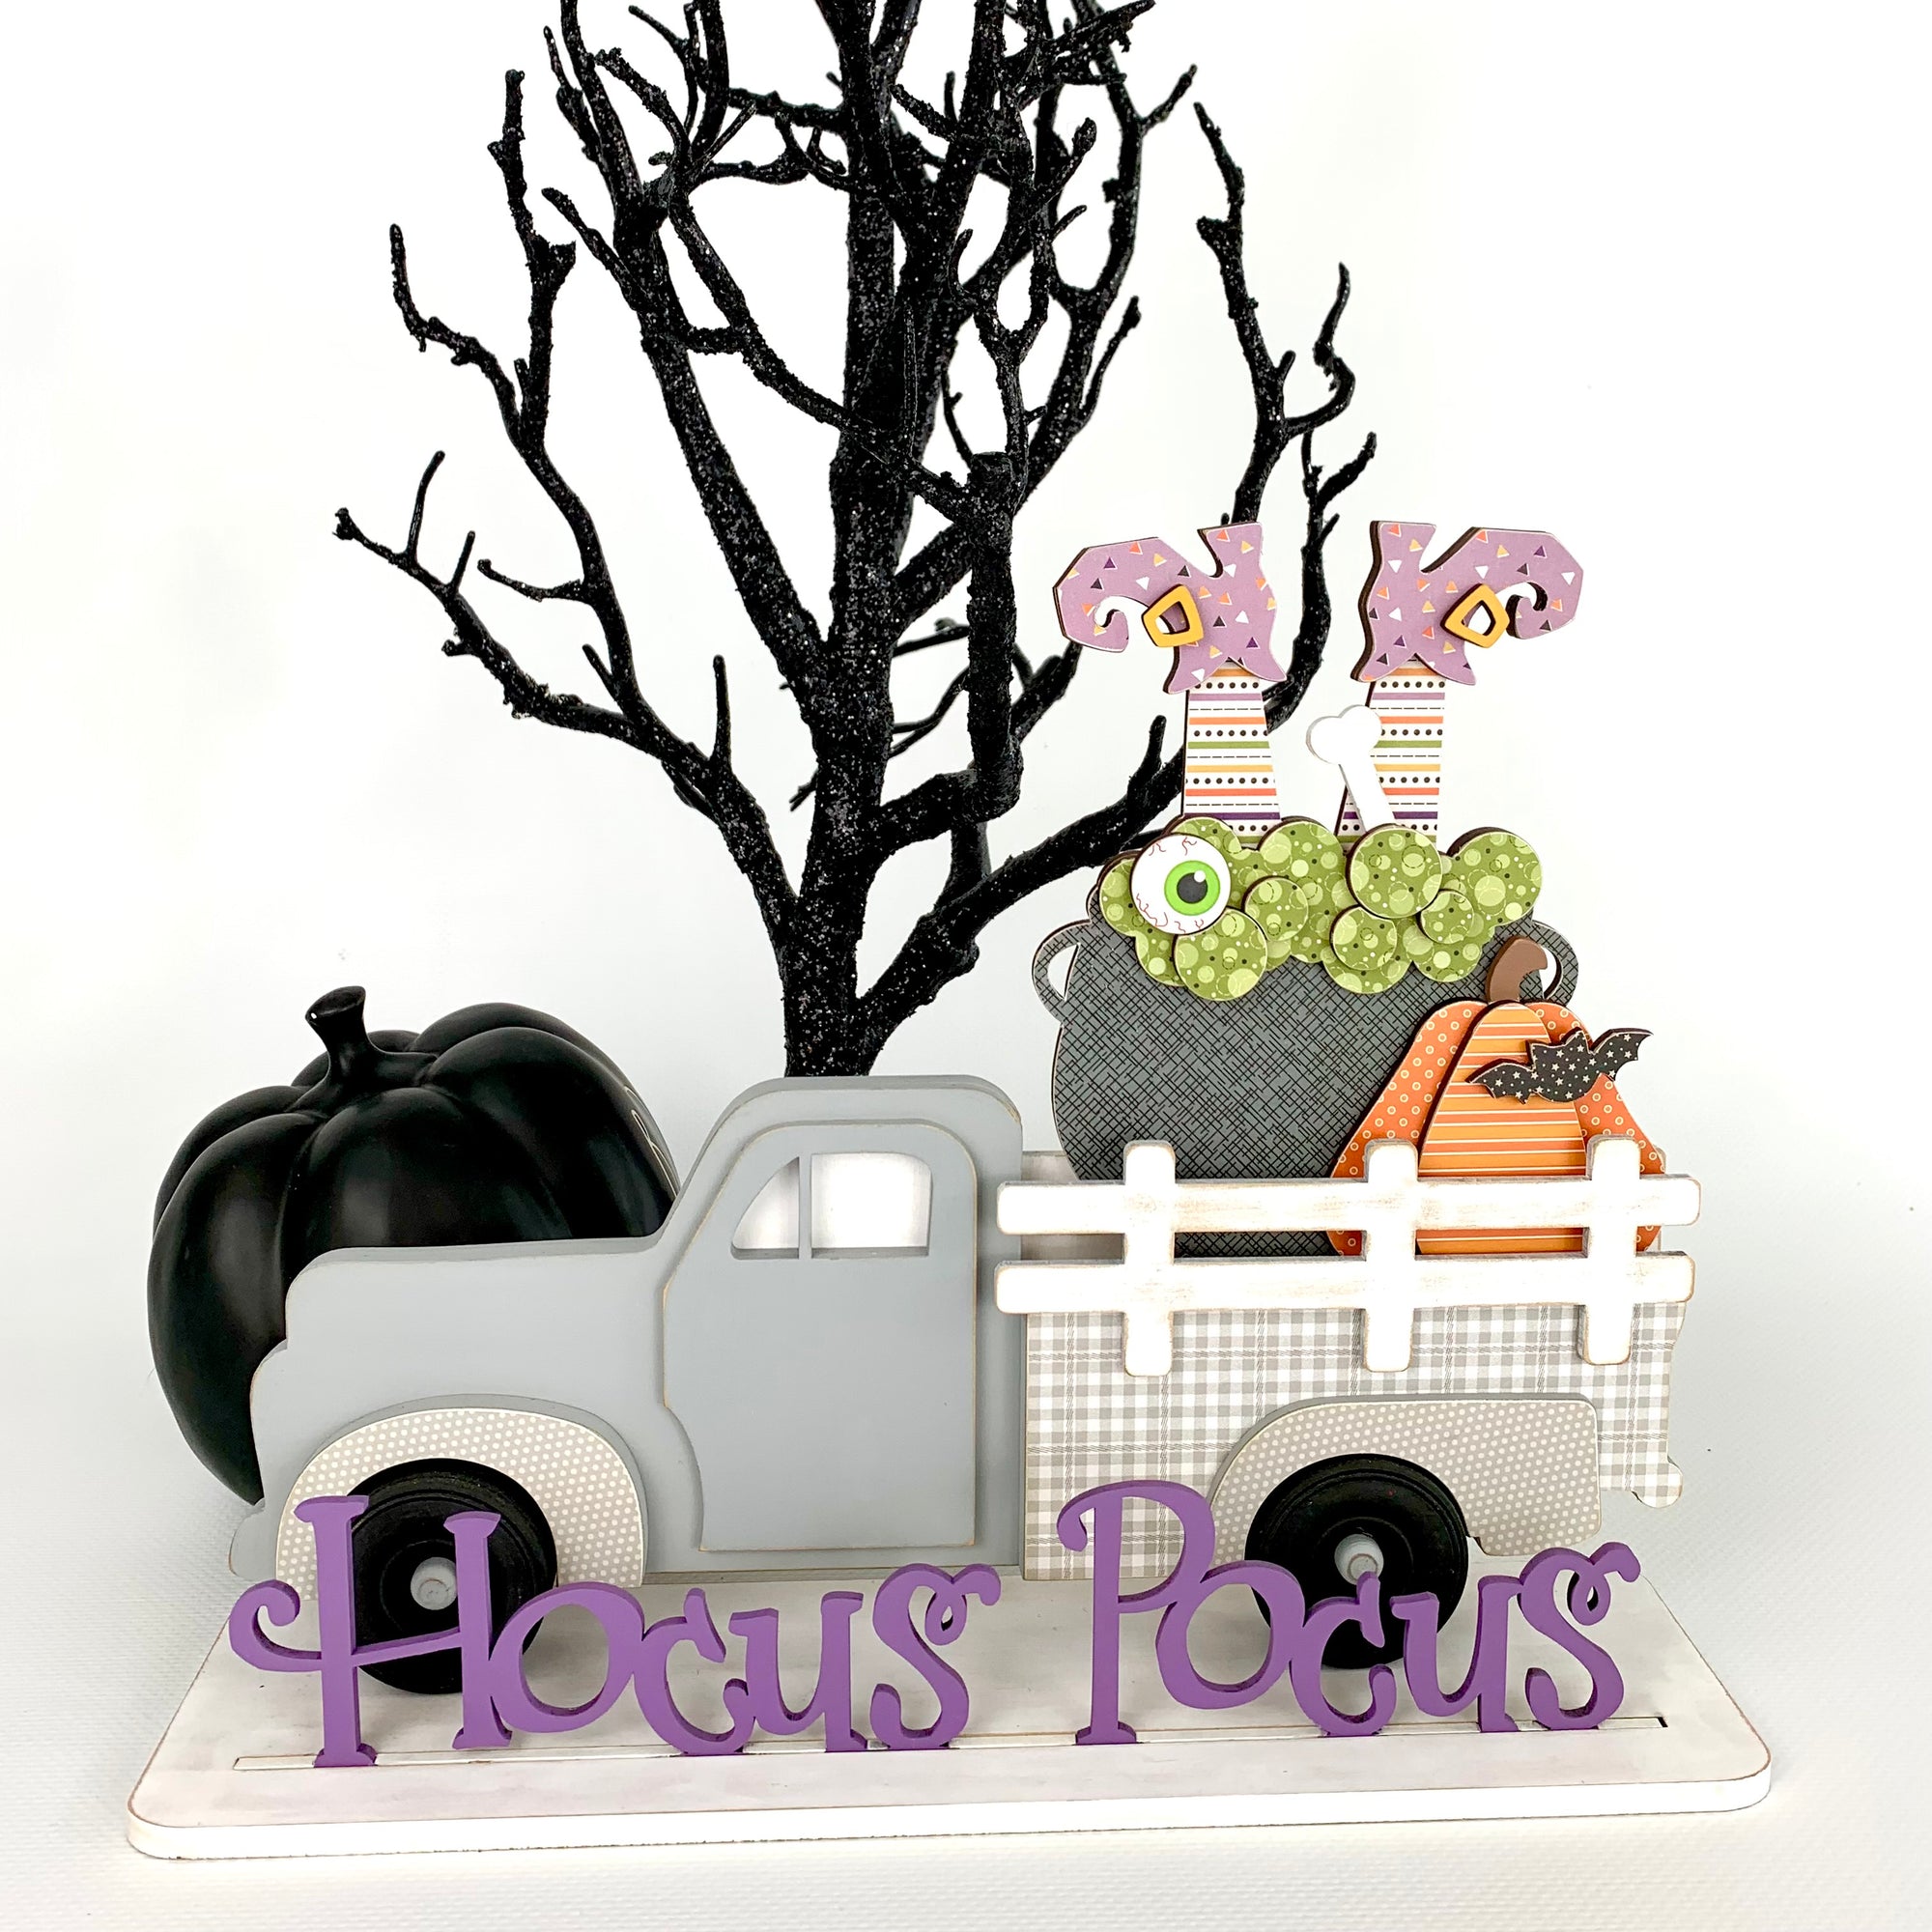 Interchangeable wood pick up truck.  Change out the wood pieces in the back of the truck.  Truck shown has a hocus pocus title with a cauldron, witches feet, and pumpkin. Wood decor Halloween craft kit.